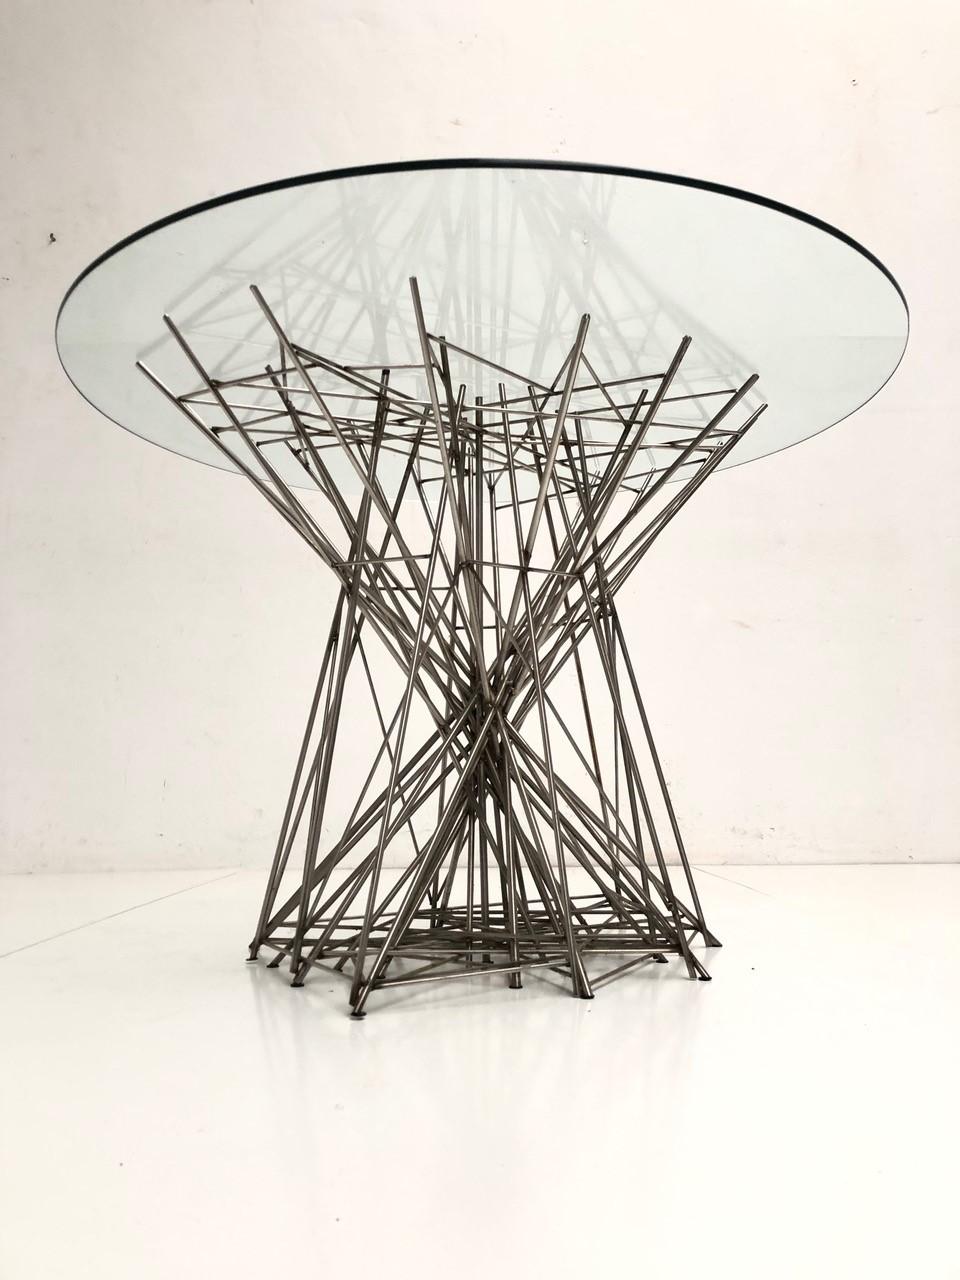 Italian Sculptural 'Spatial' Form Dining Table in Style of Sculptor Norbert Kricke 1970s